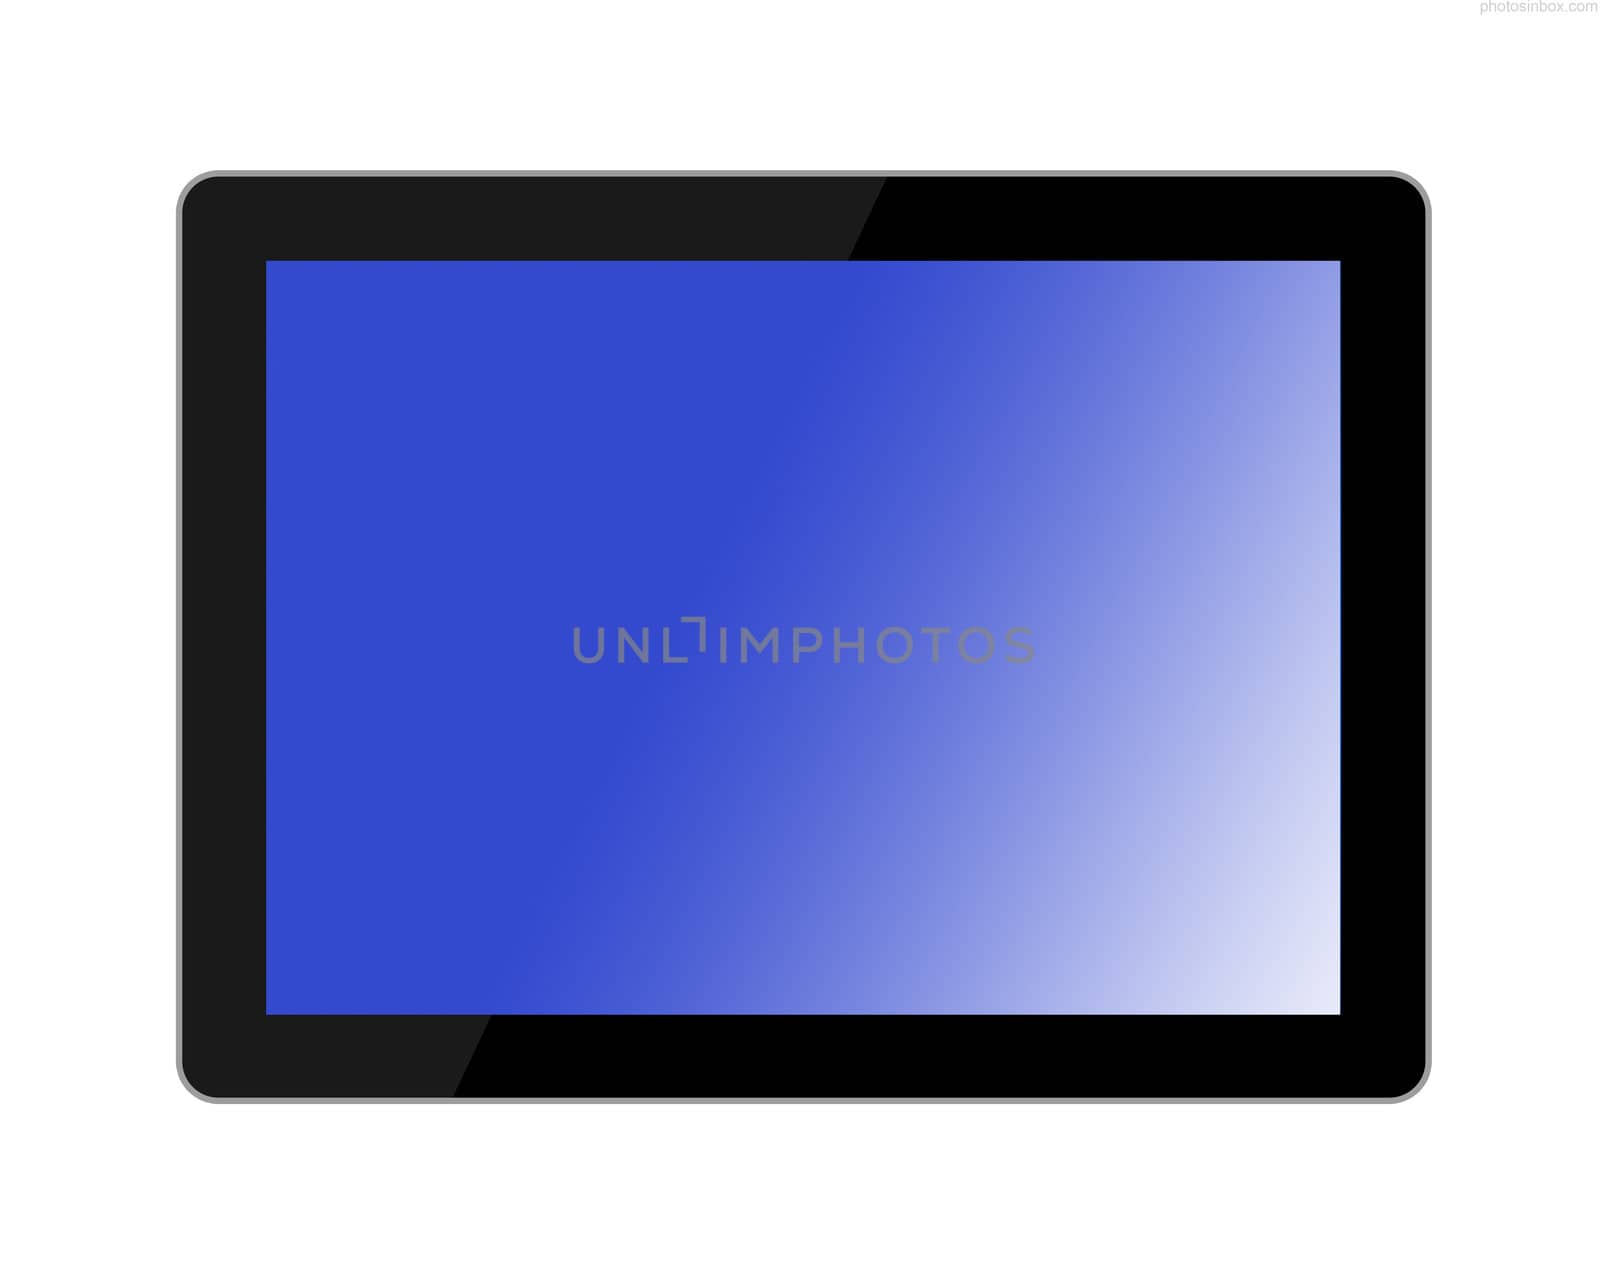 Digital tablet with blue screen by jasminmuratovic